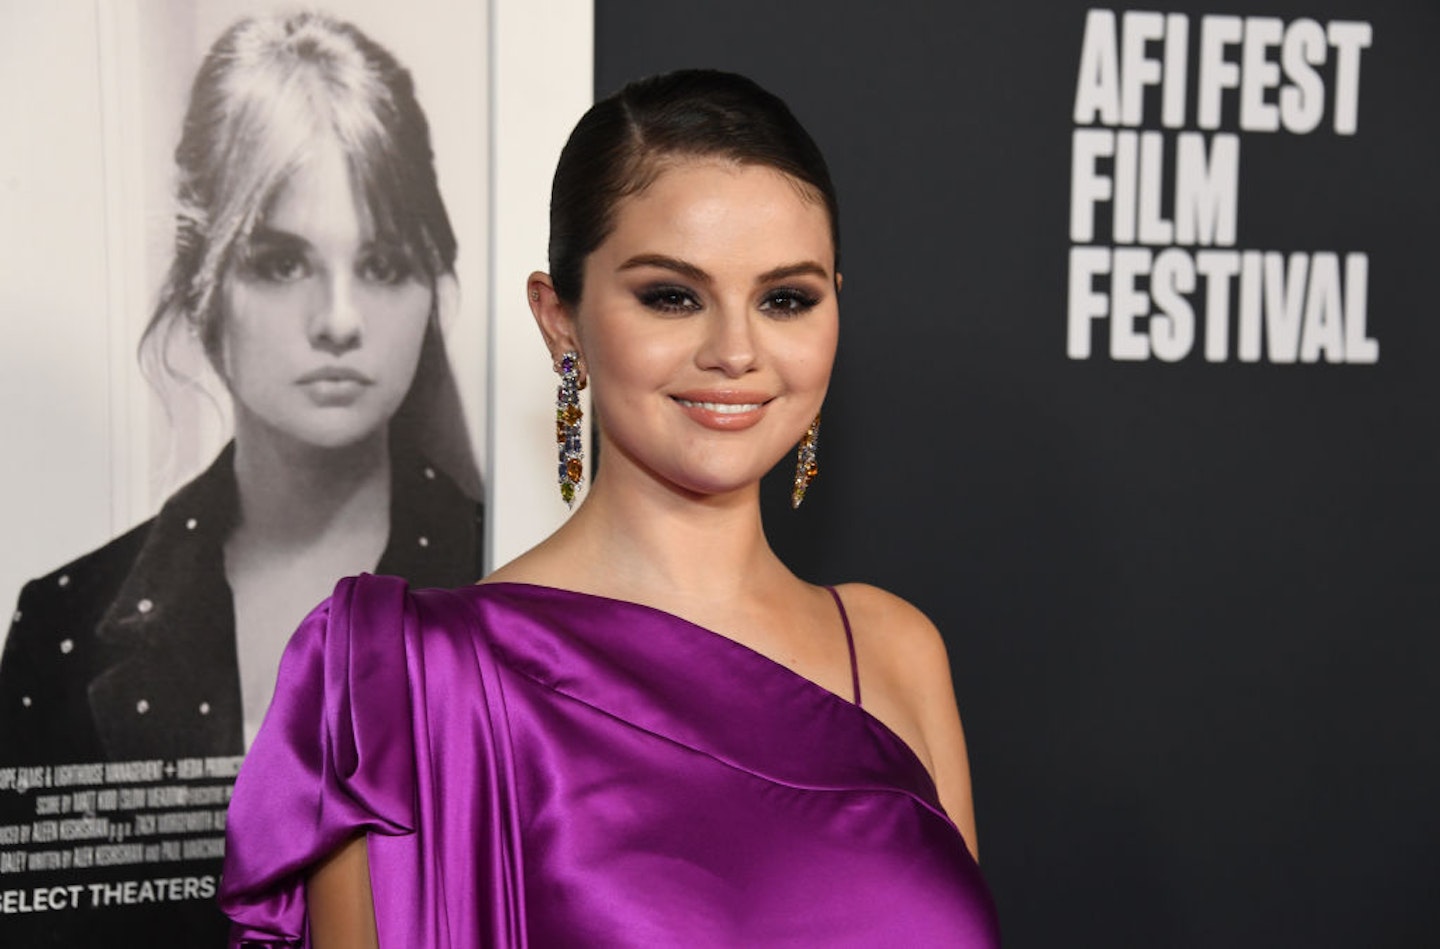 Selena Gomez Survived Social Media and, With Her New Music, Is Ready to  Leave Darkness Behind